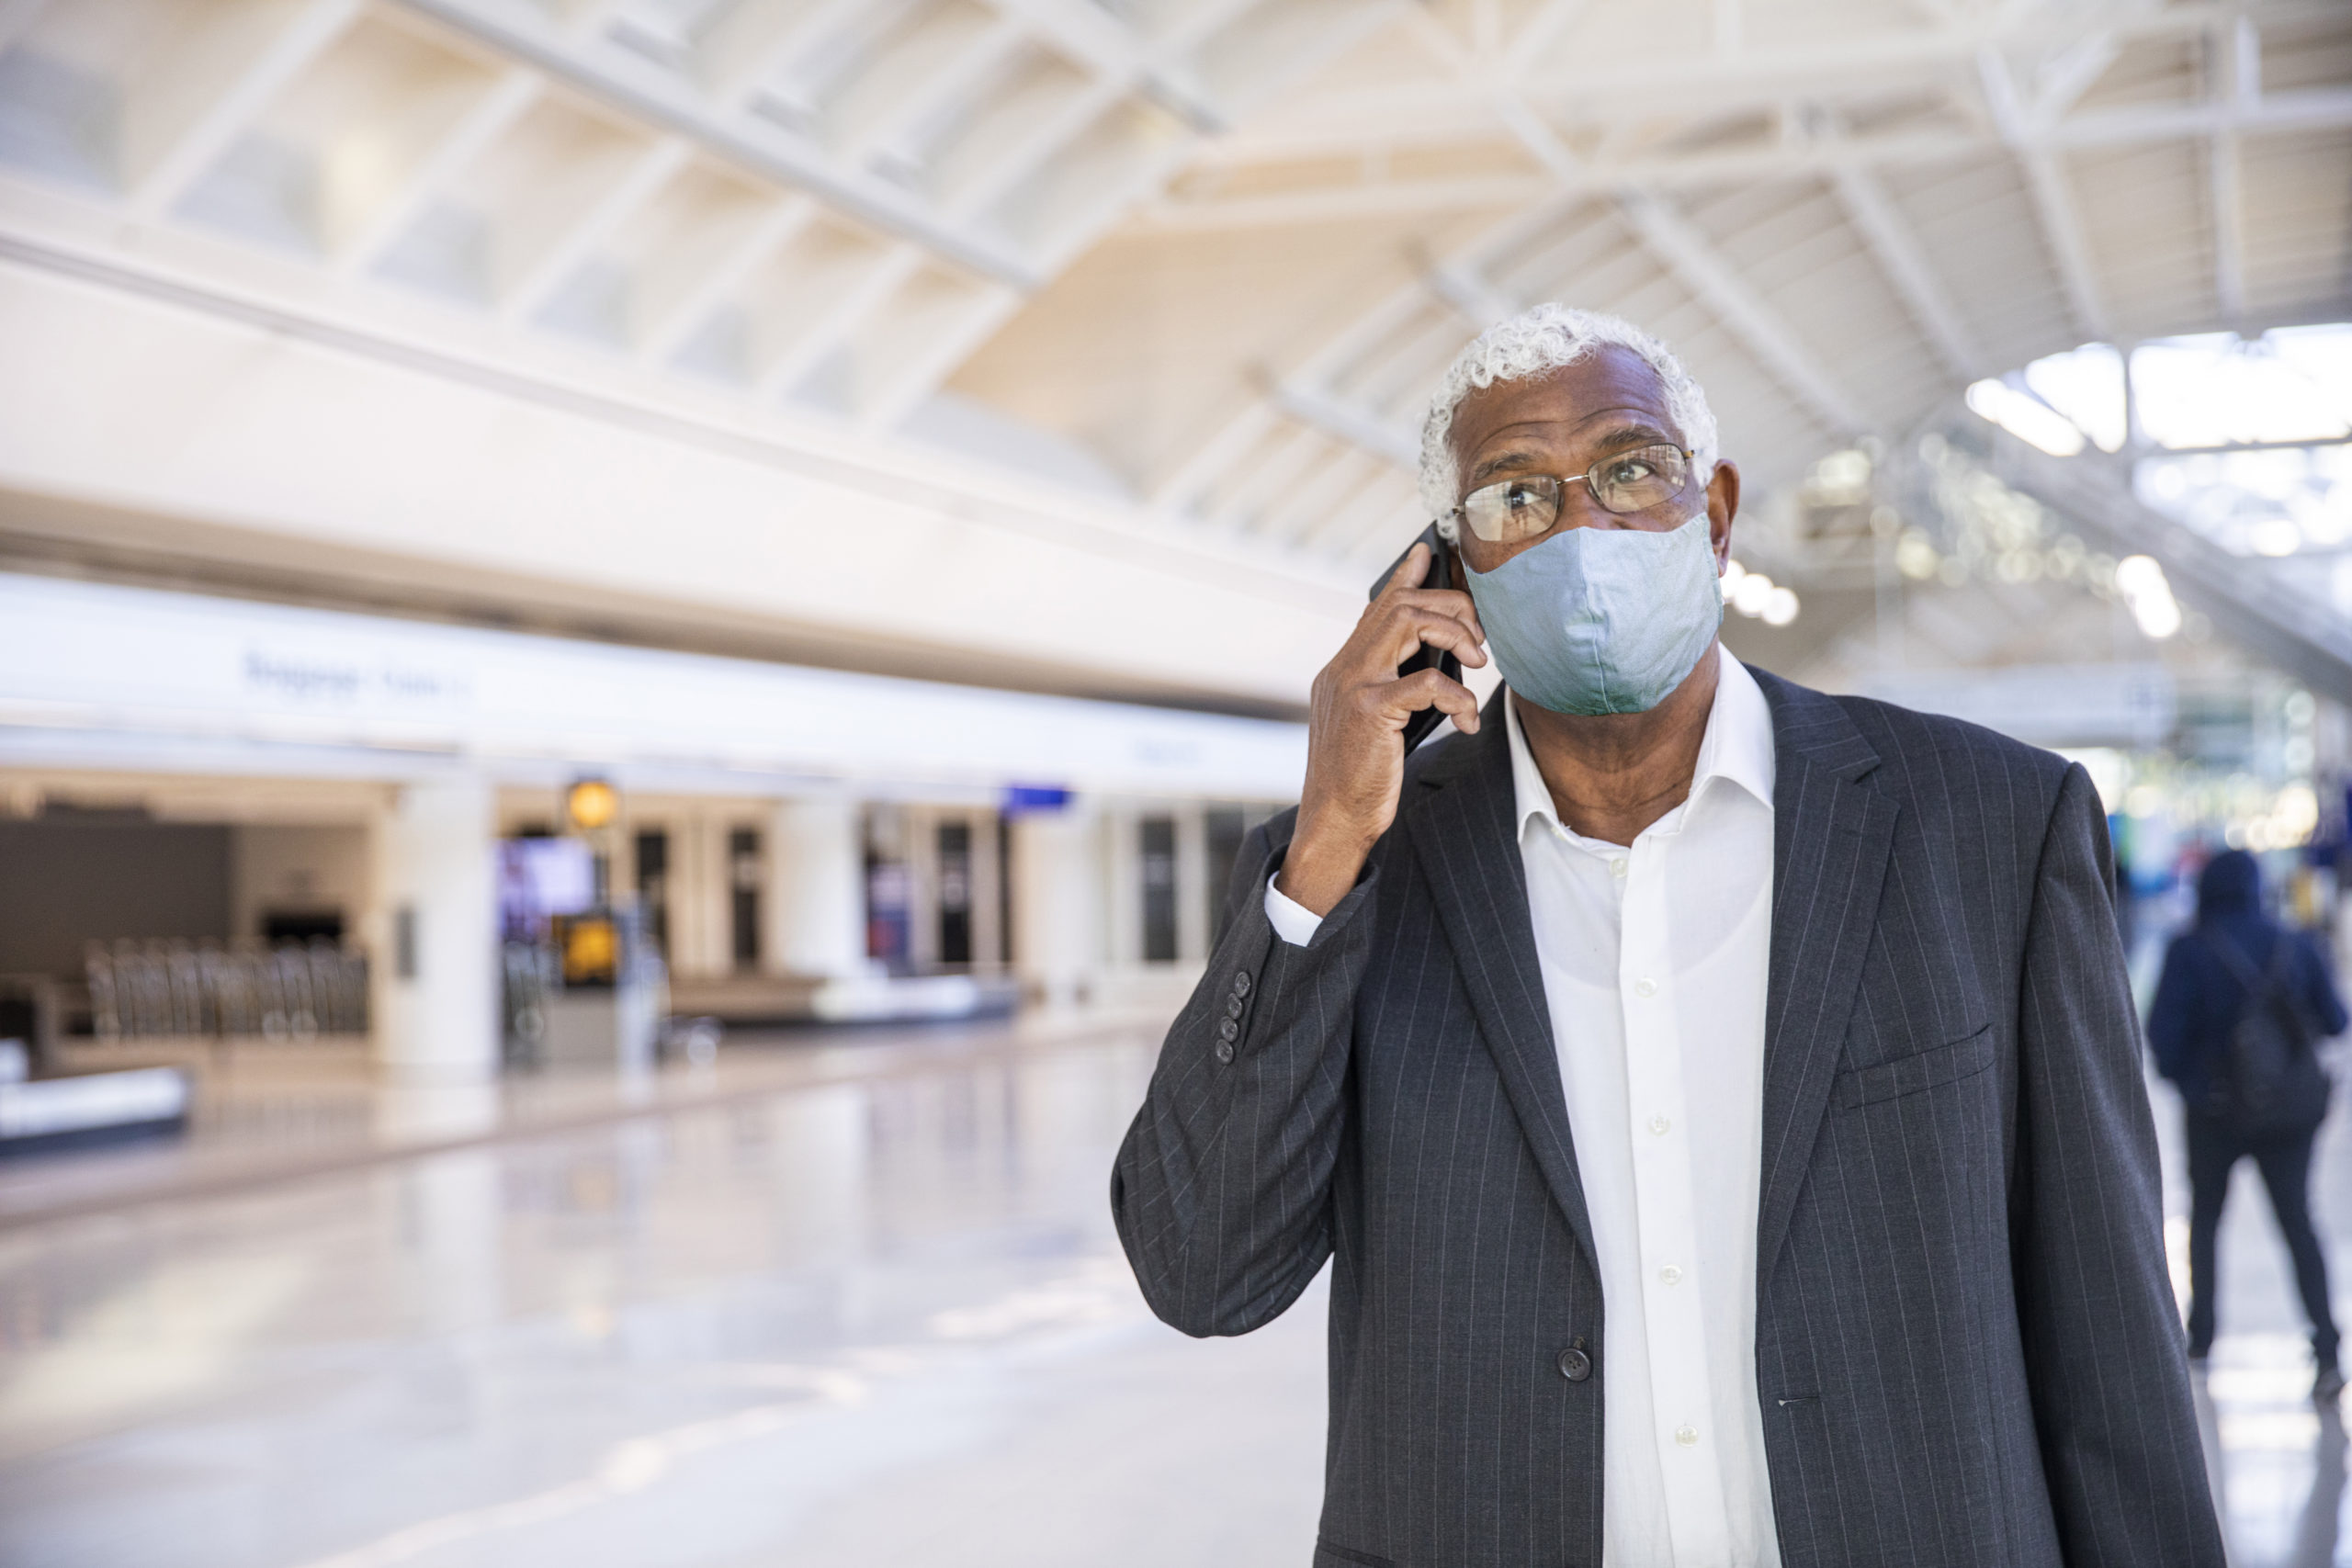 'Never The Same': 4 Ways Corporate Travel Has Changed Since The COVID-19 Pandemic